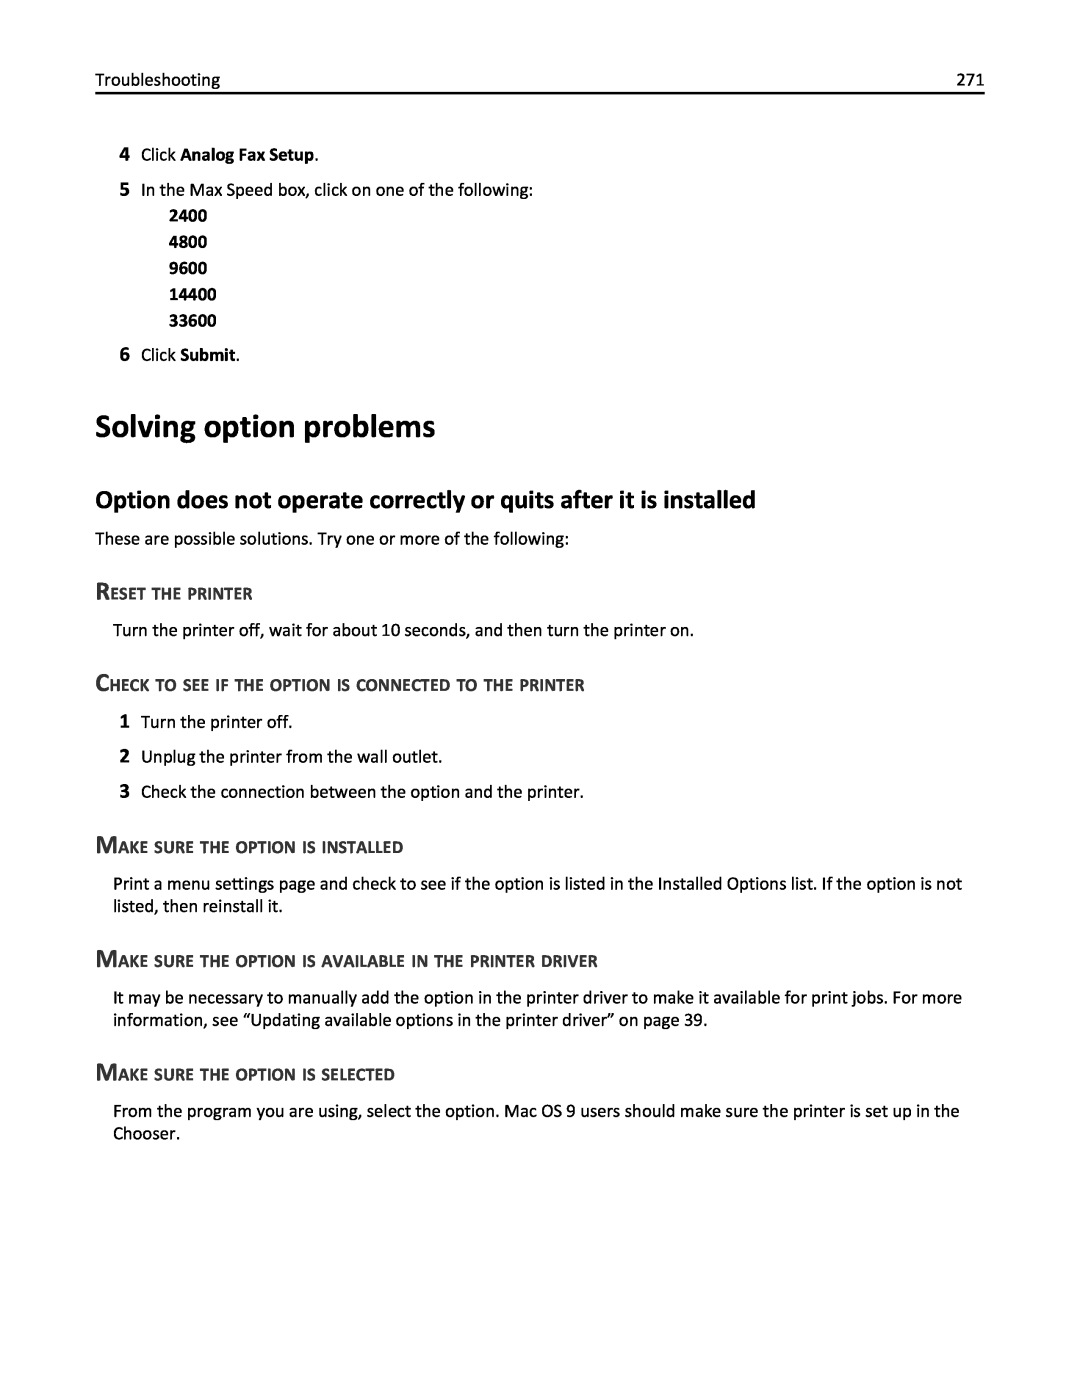 Lexmark 19Z4028, 432, 19Z0101, 632 Solving option problems, Option does not operate correctly or quits after it is installed 